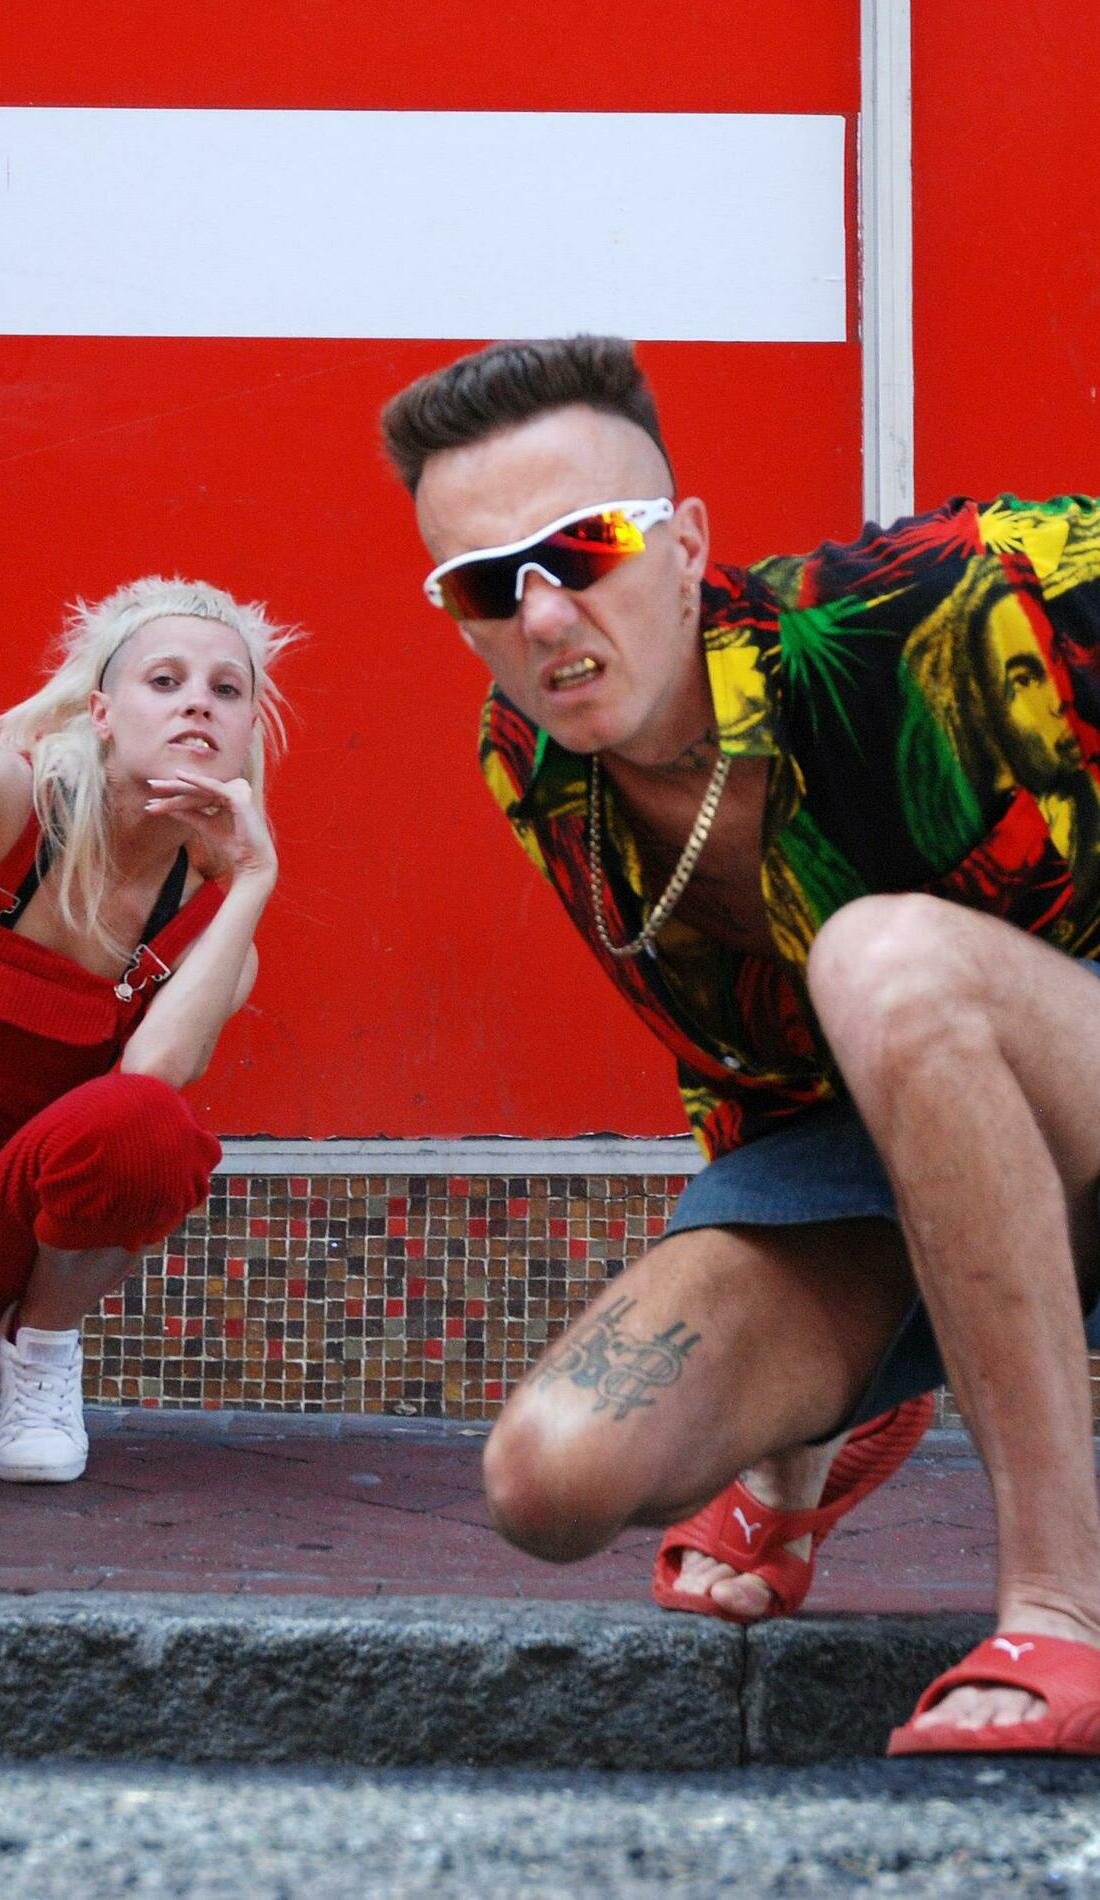 A Die Antwoord live event